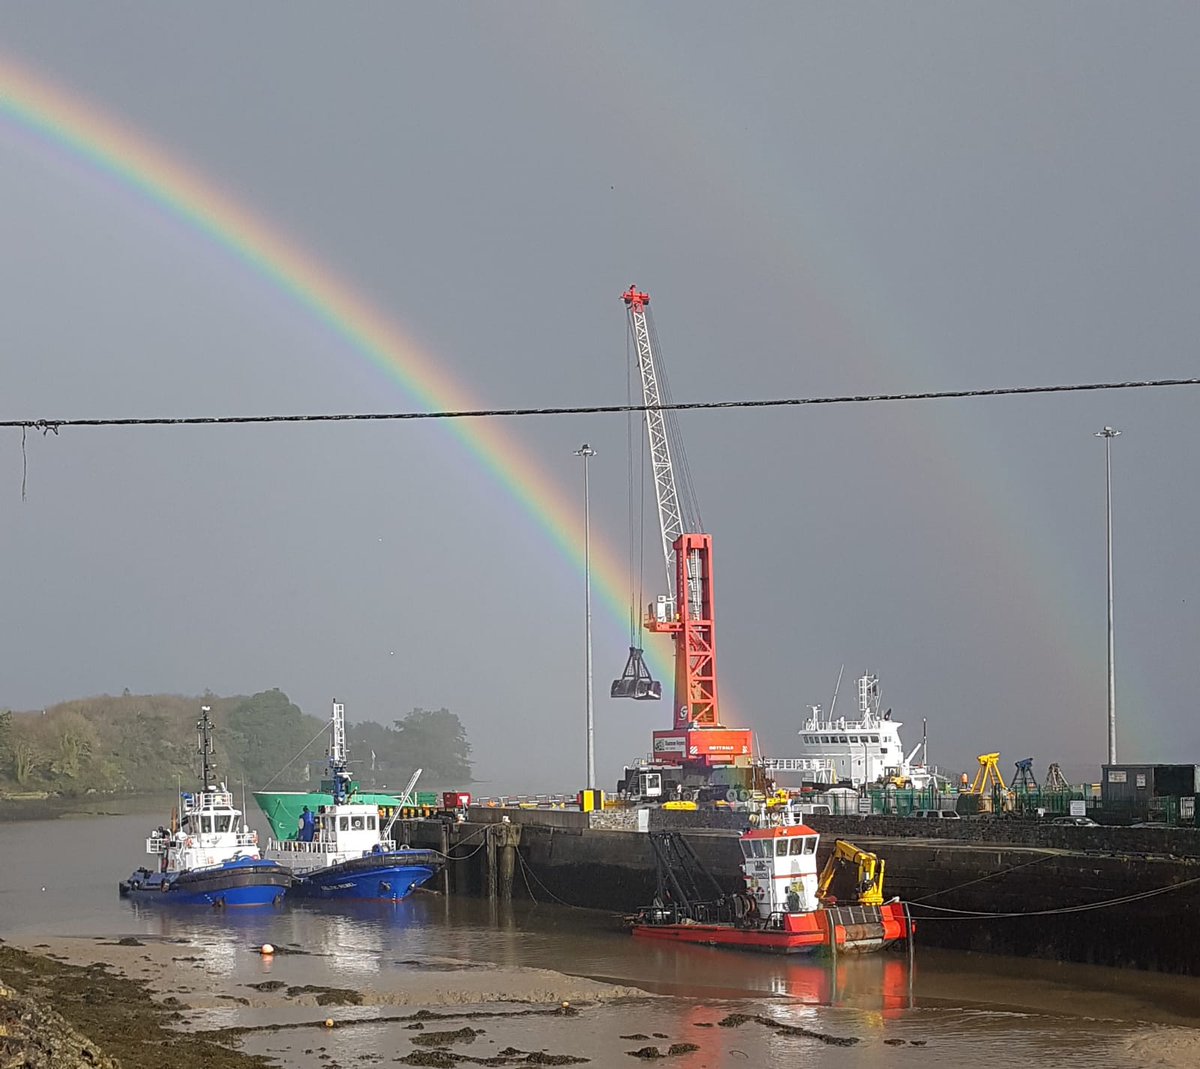 Beautiful way to start the morning with this photo from our Port in Foynes. Not sure there was gold at the end of the rainbow but there was animal feed in this ship.
#globalconnectivity 
#pilotboats #ports #nationalsupplychain 
#deepwaterport 
Photo Credit: Aoife Lenihan